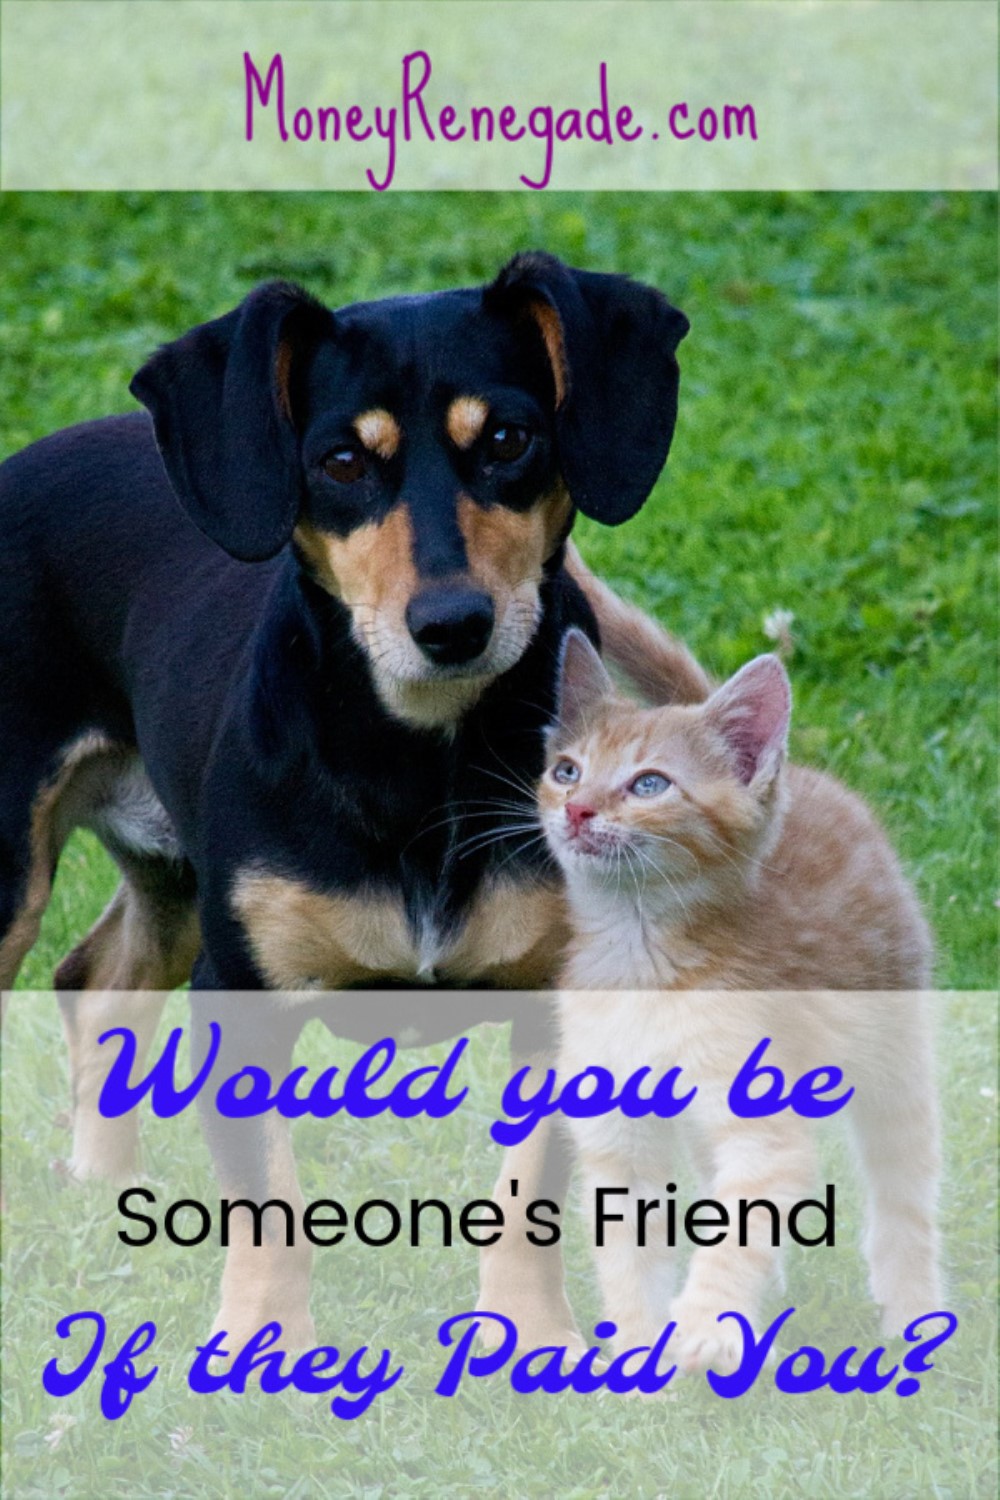 would you be paid to be someone's friend